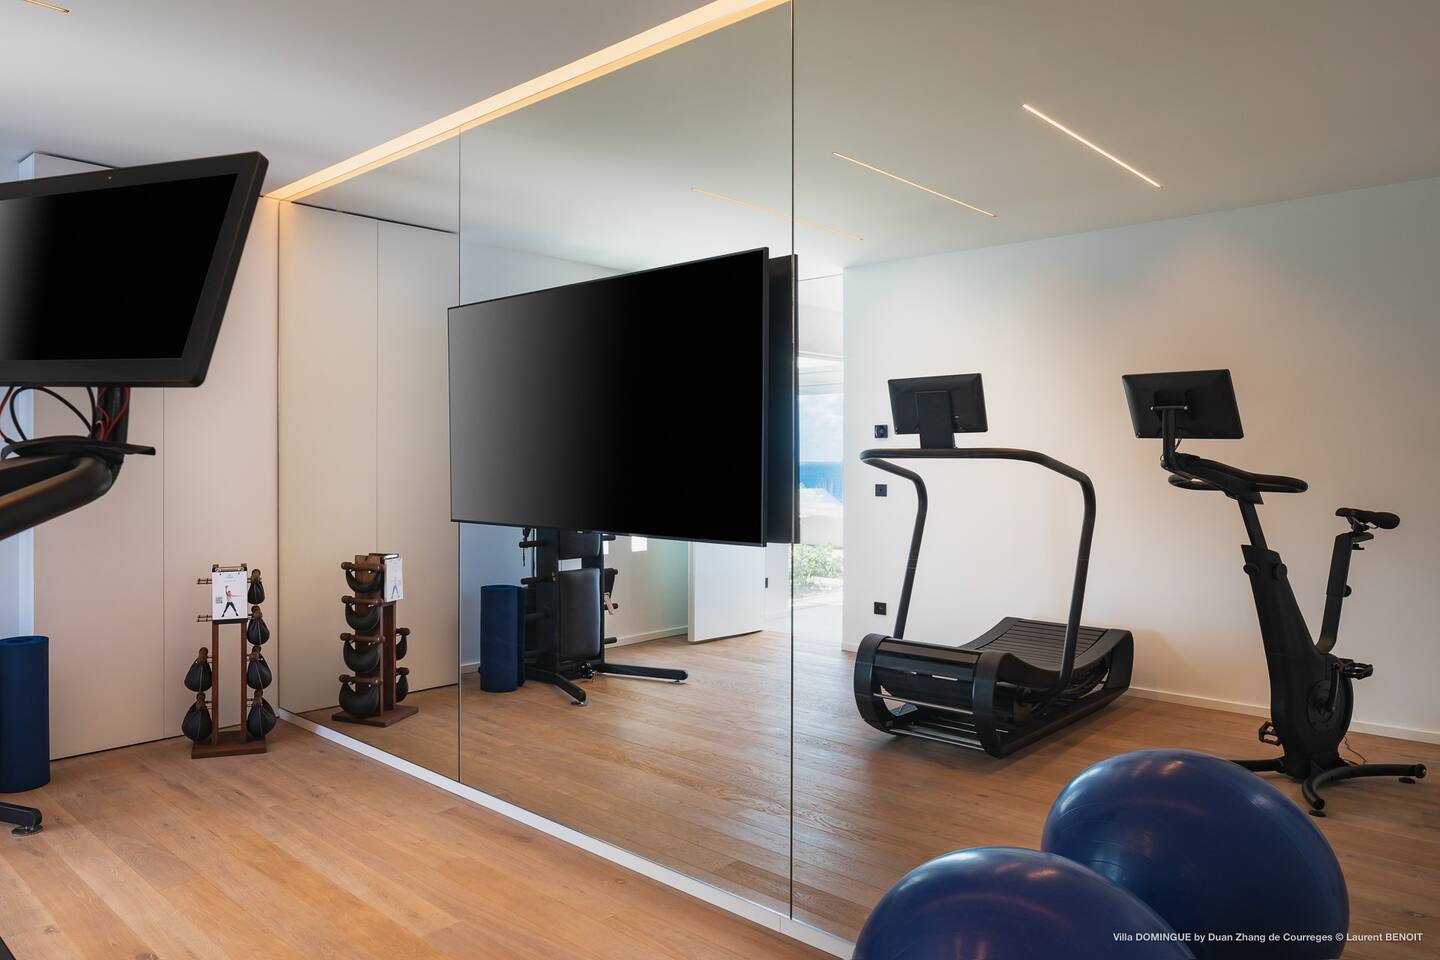 Well-equipped gym facility in the villa, featuring state-of-the-art exercise equipment and ample space for fitness activities.

